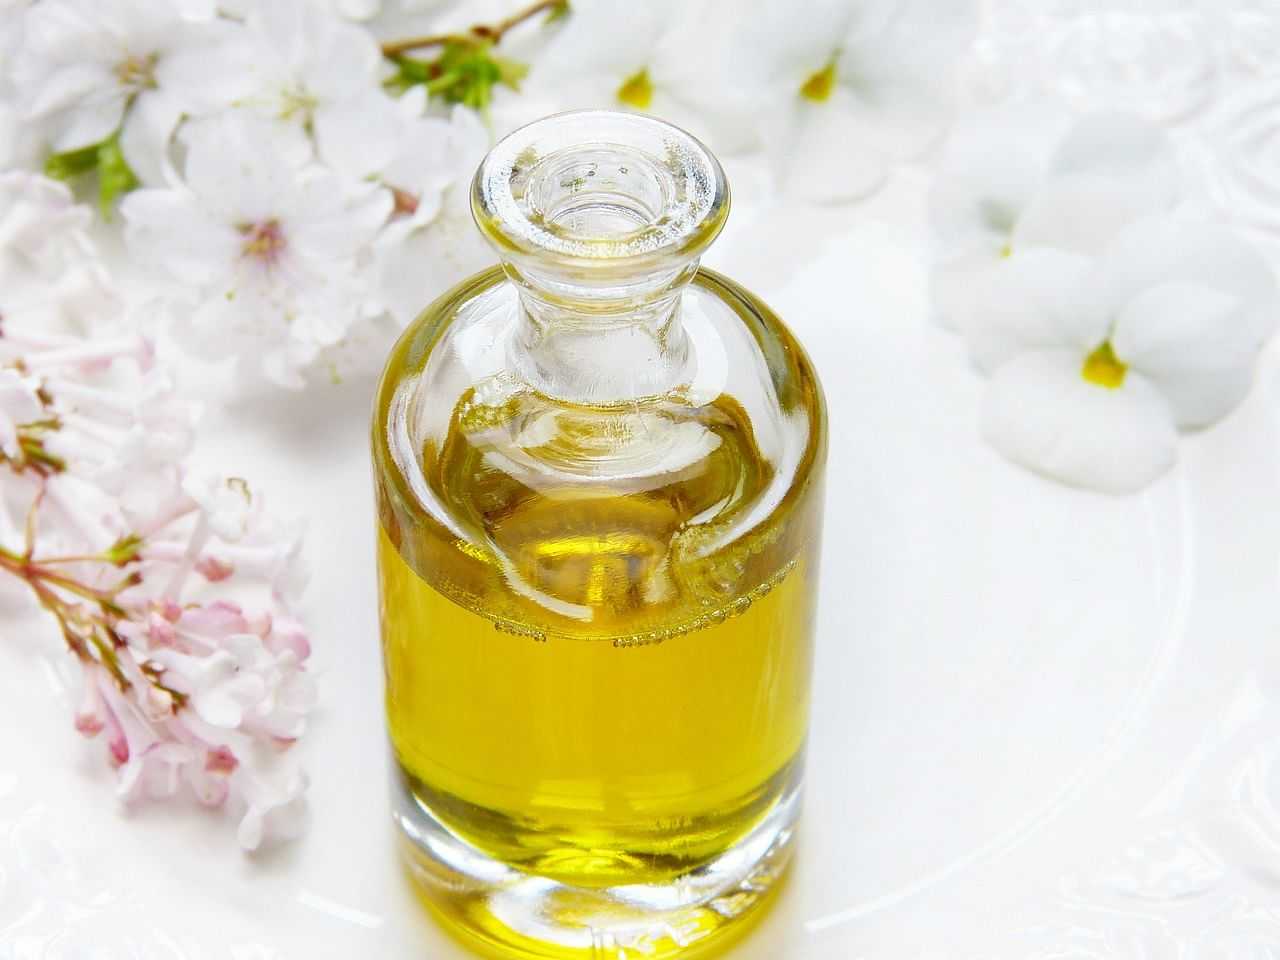 Clear glass bottle of yellow oil with white blossoms on white background.